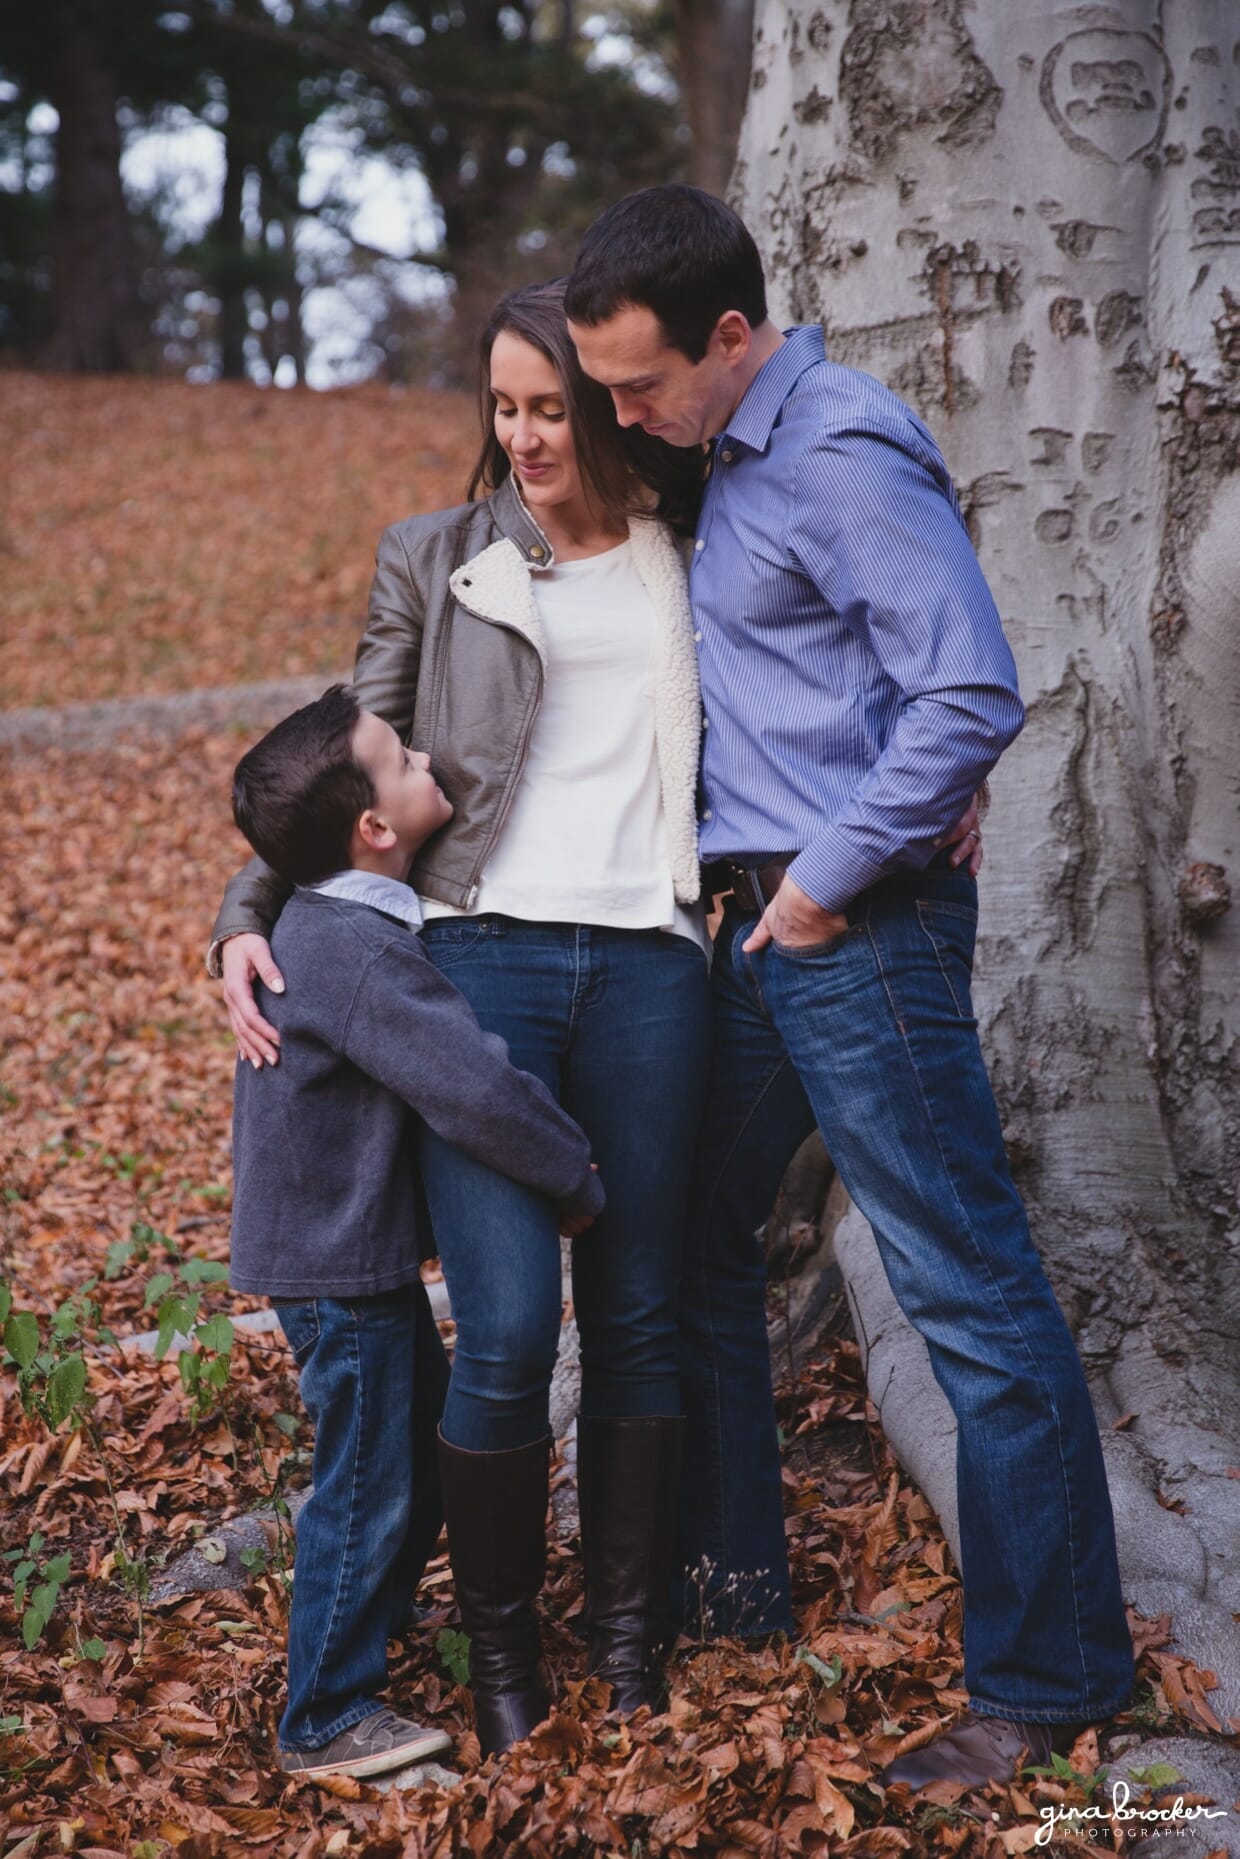 A portrait of a family beside a tree during their fall family photo session in Boston's Arnold Arboretum